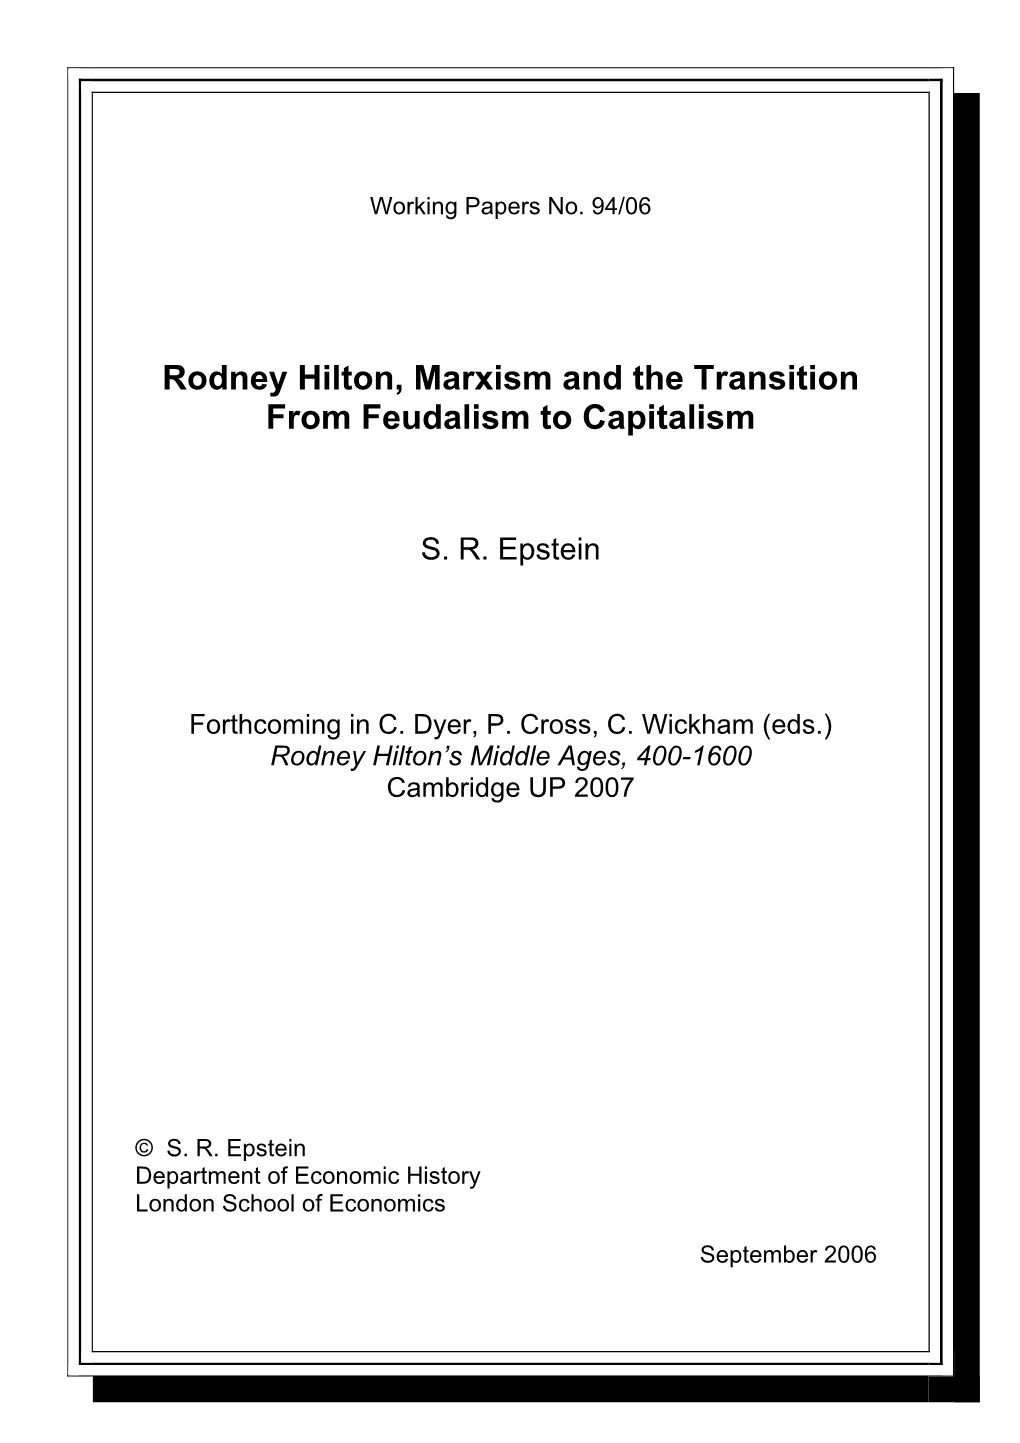 Rodney Hilton, Marxism and the Transition from Feudalism to Capitalism